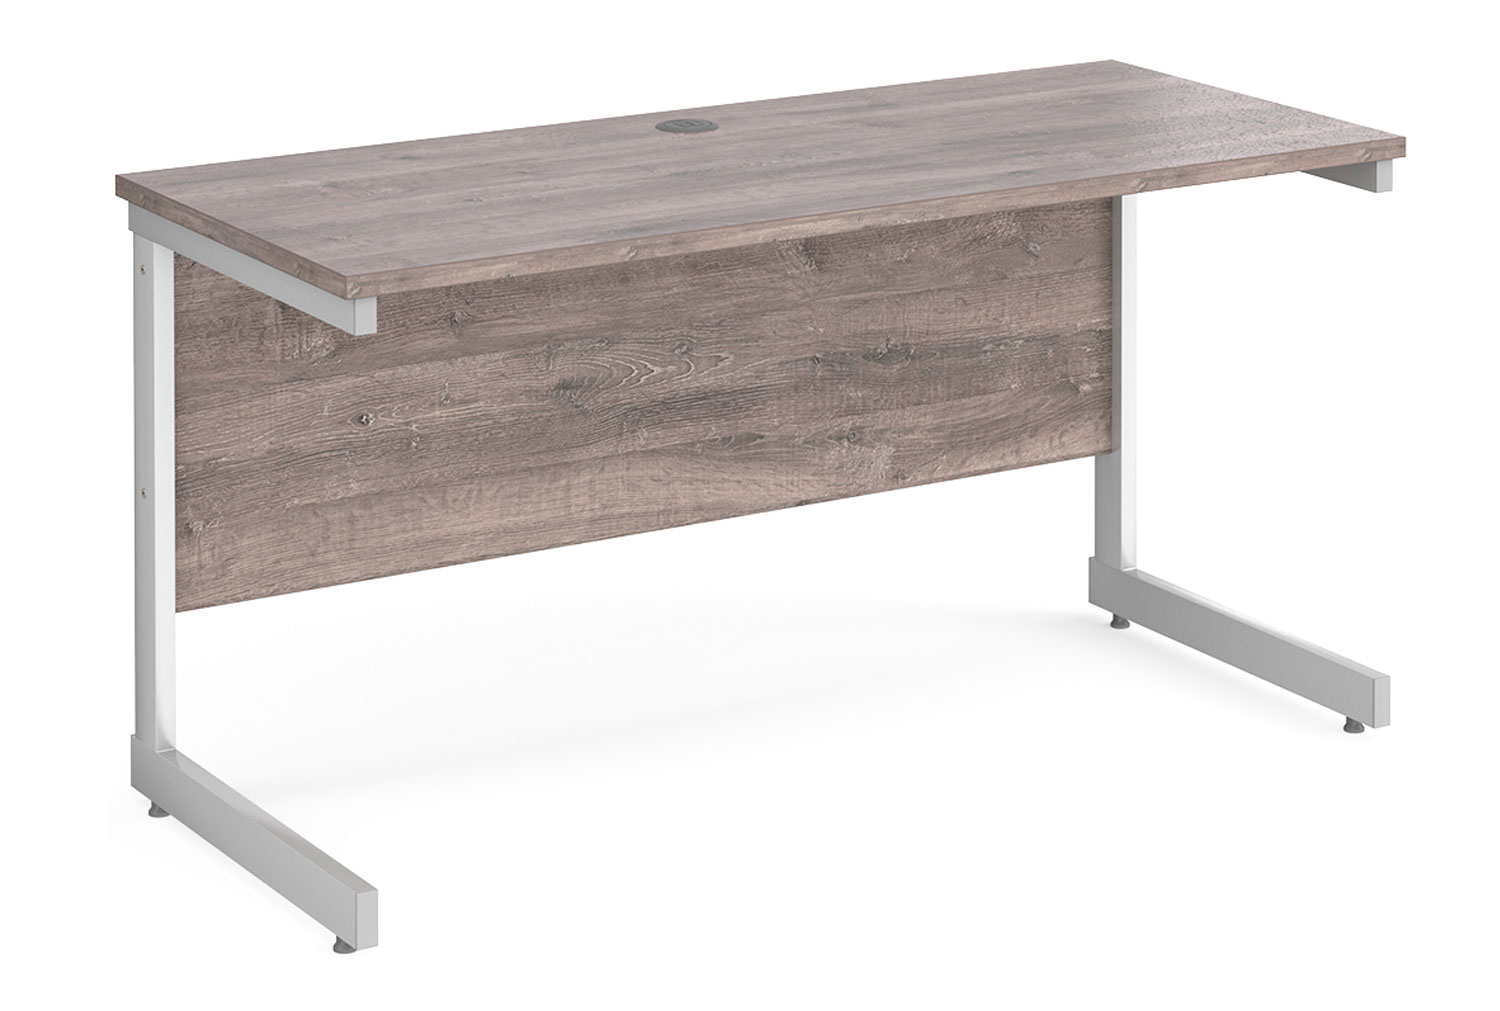 Thrifty Next-Day Narrow Rectangular Office Desk Grey Oak, 140wx60dx73h (cm), Express Delivery